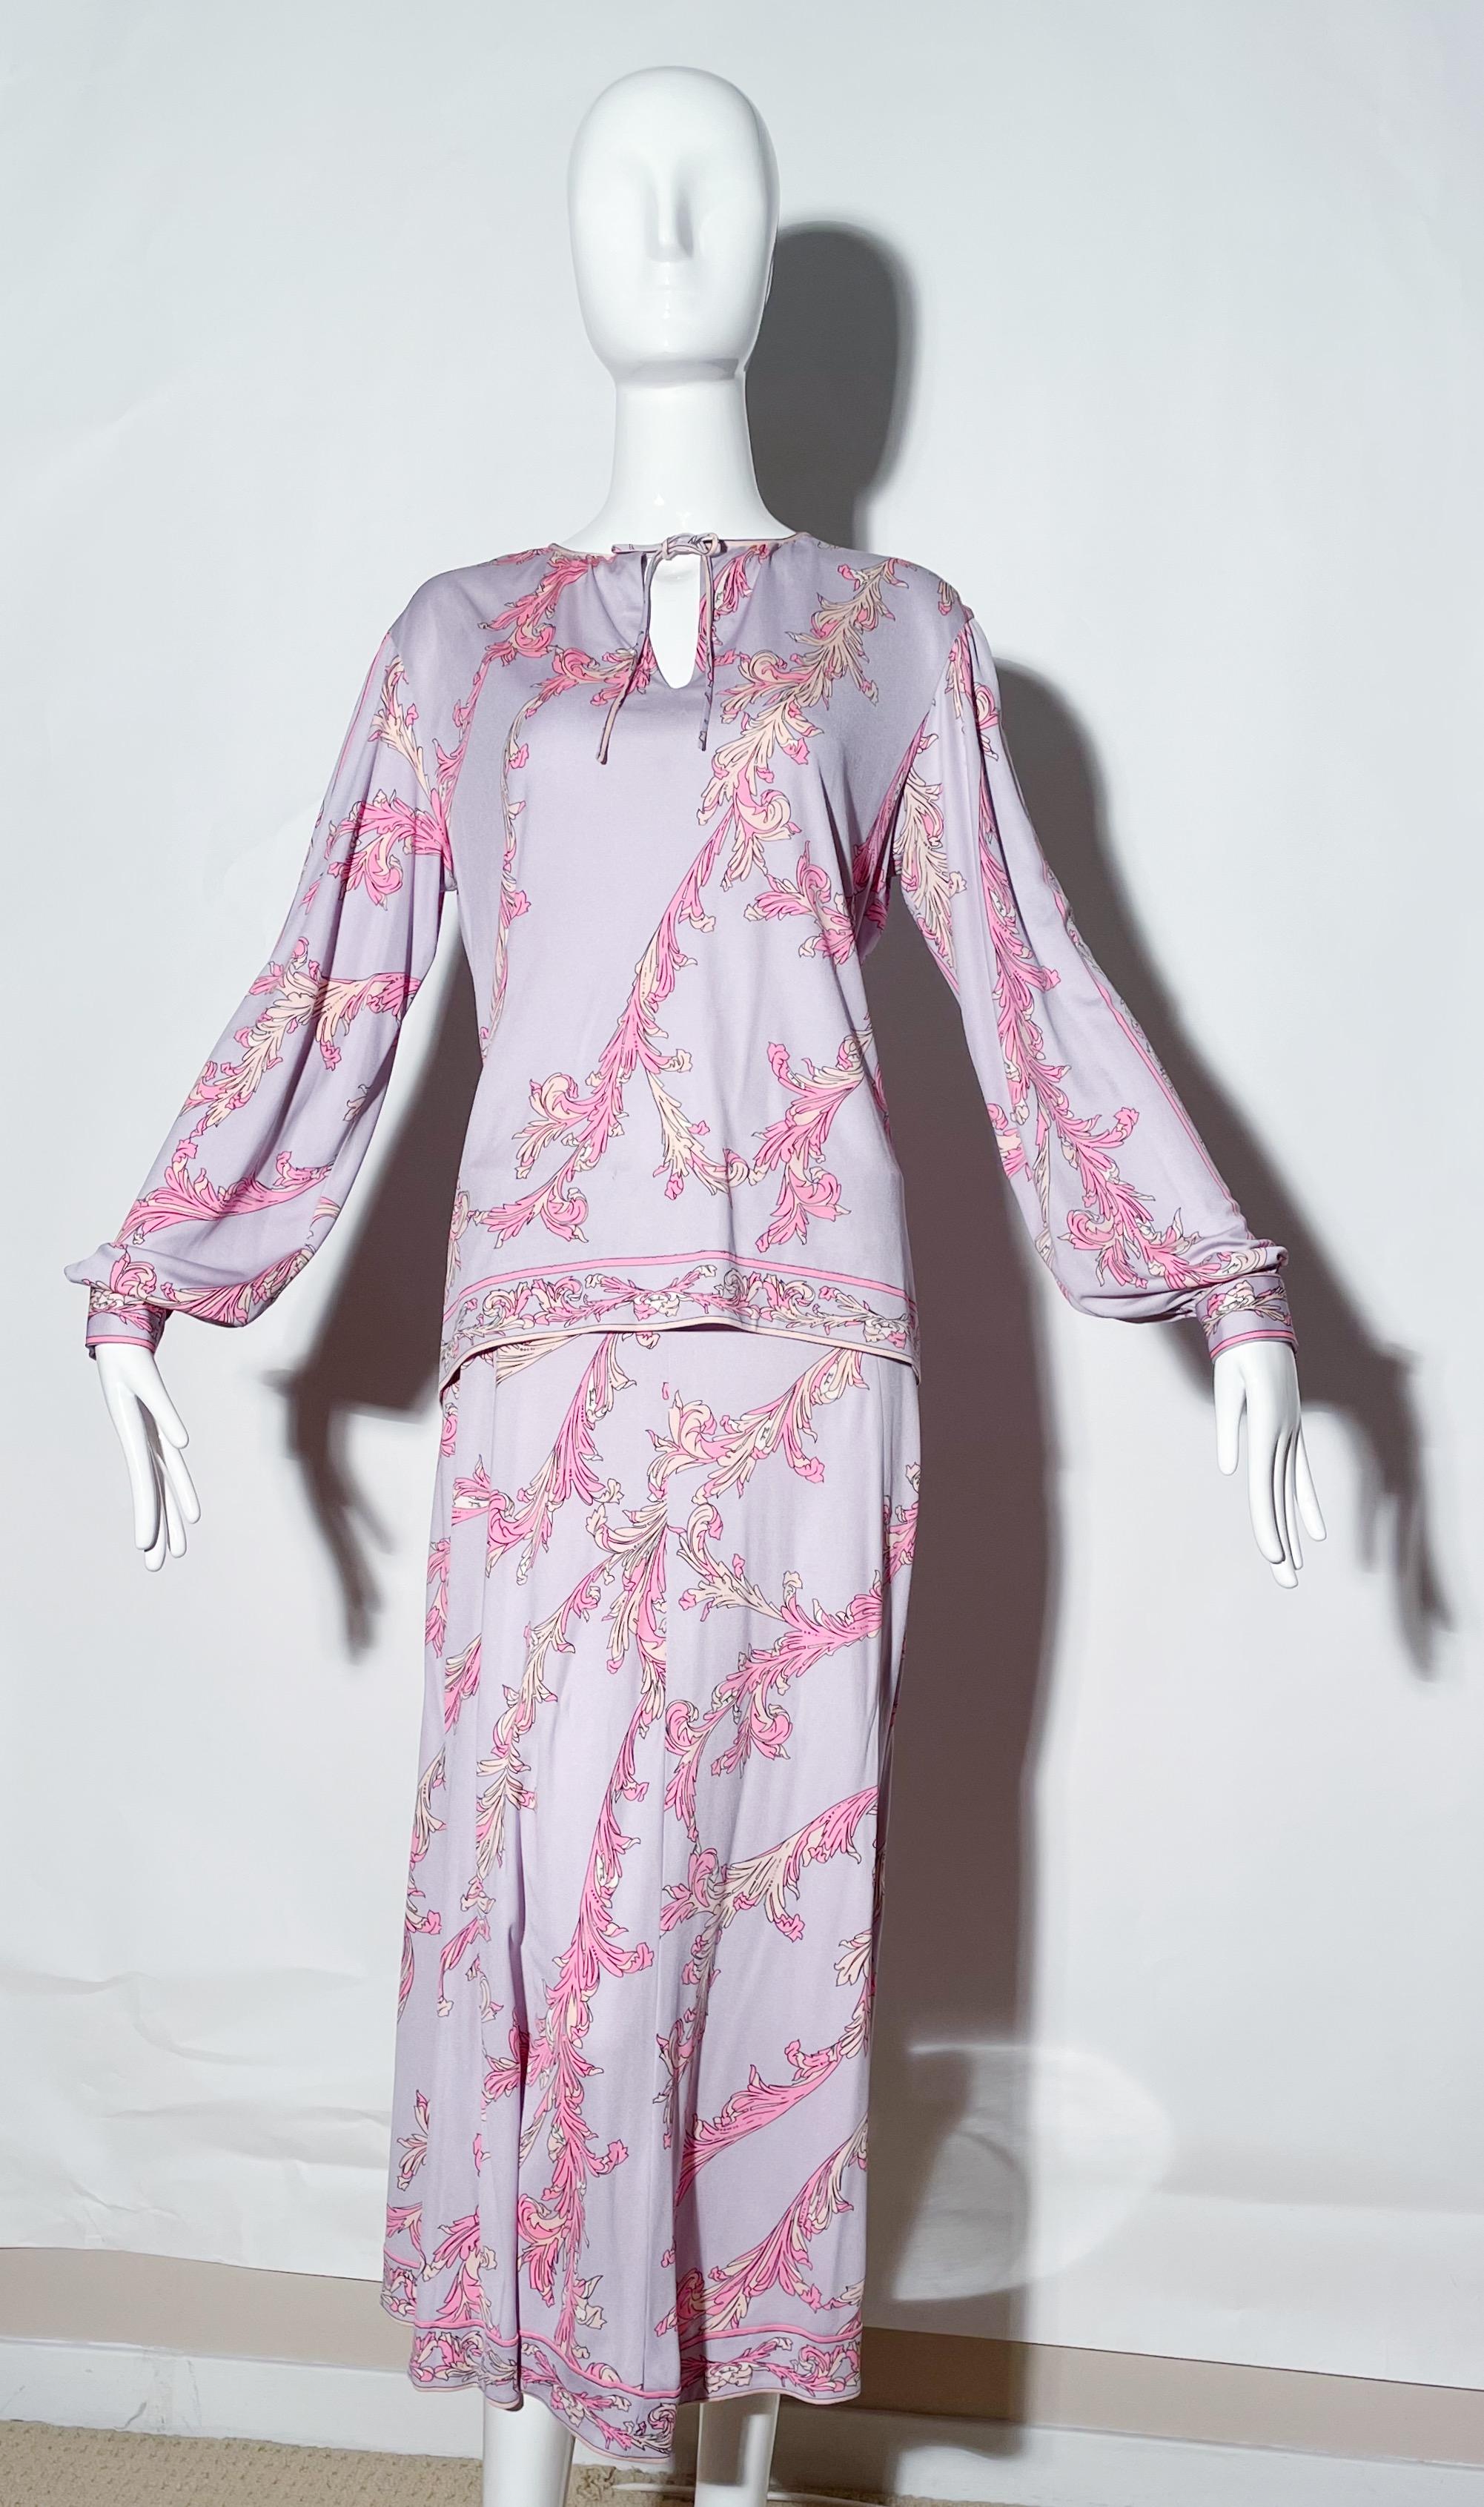 Purple and pink printed skirt and blouse set. Front tie at neckline. Rear zipper on skirt. Silk. Made in Italy. 
*Condition: Excellent vintage condition. No visible Flaws.

Measurements Taken Laying Flat (inches)—
Shoulder to Shoulder: 17 in.
Sleeve